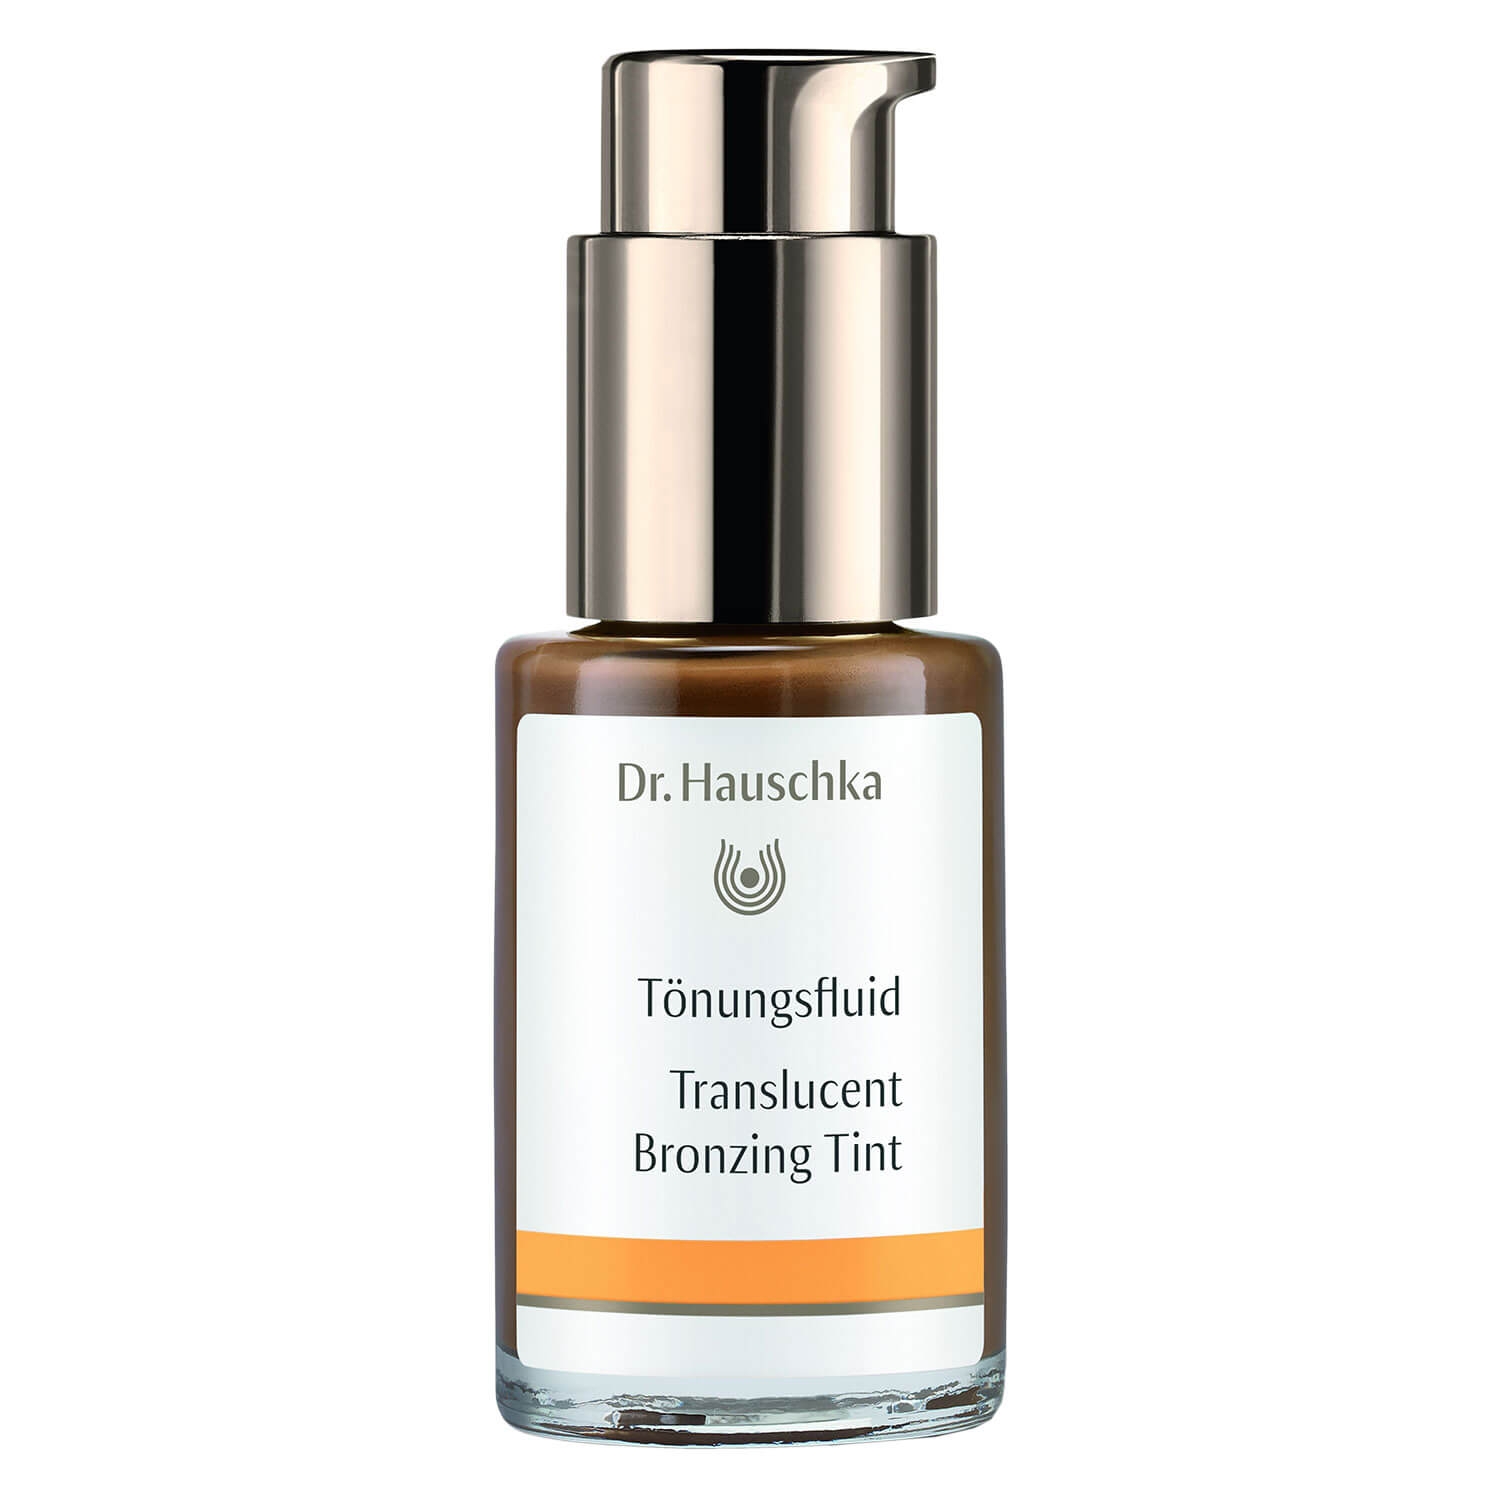 Product image from Dr. Hauschka - Tönungsfluid